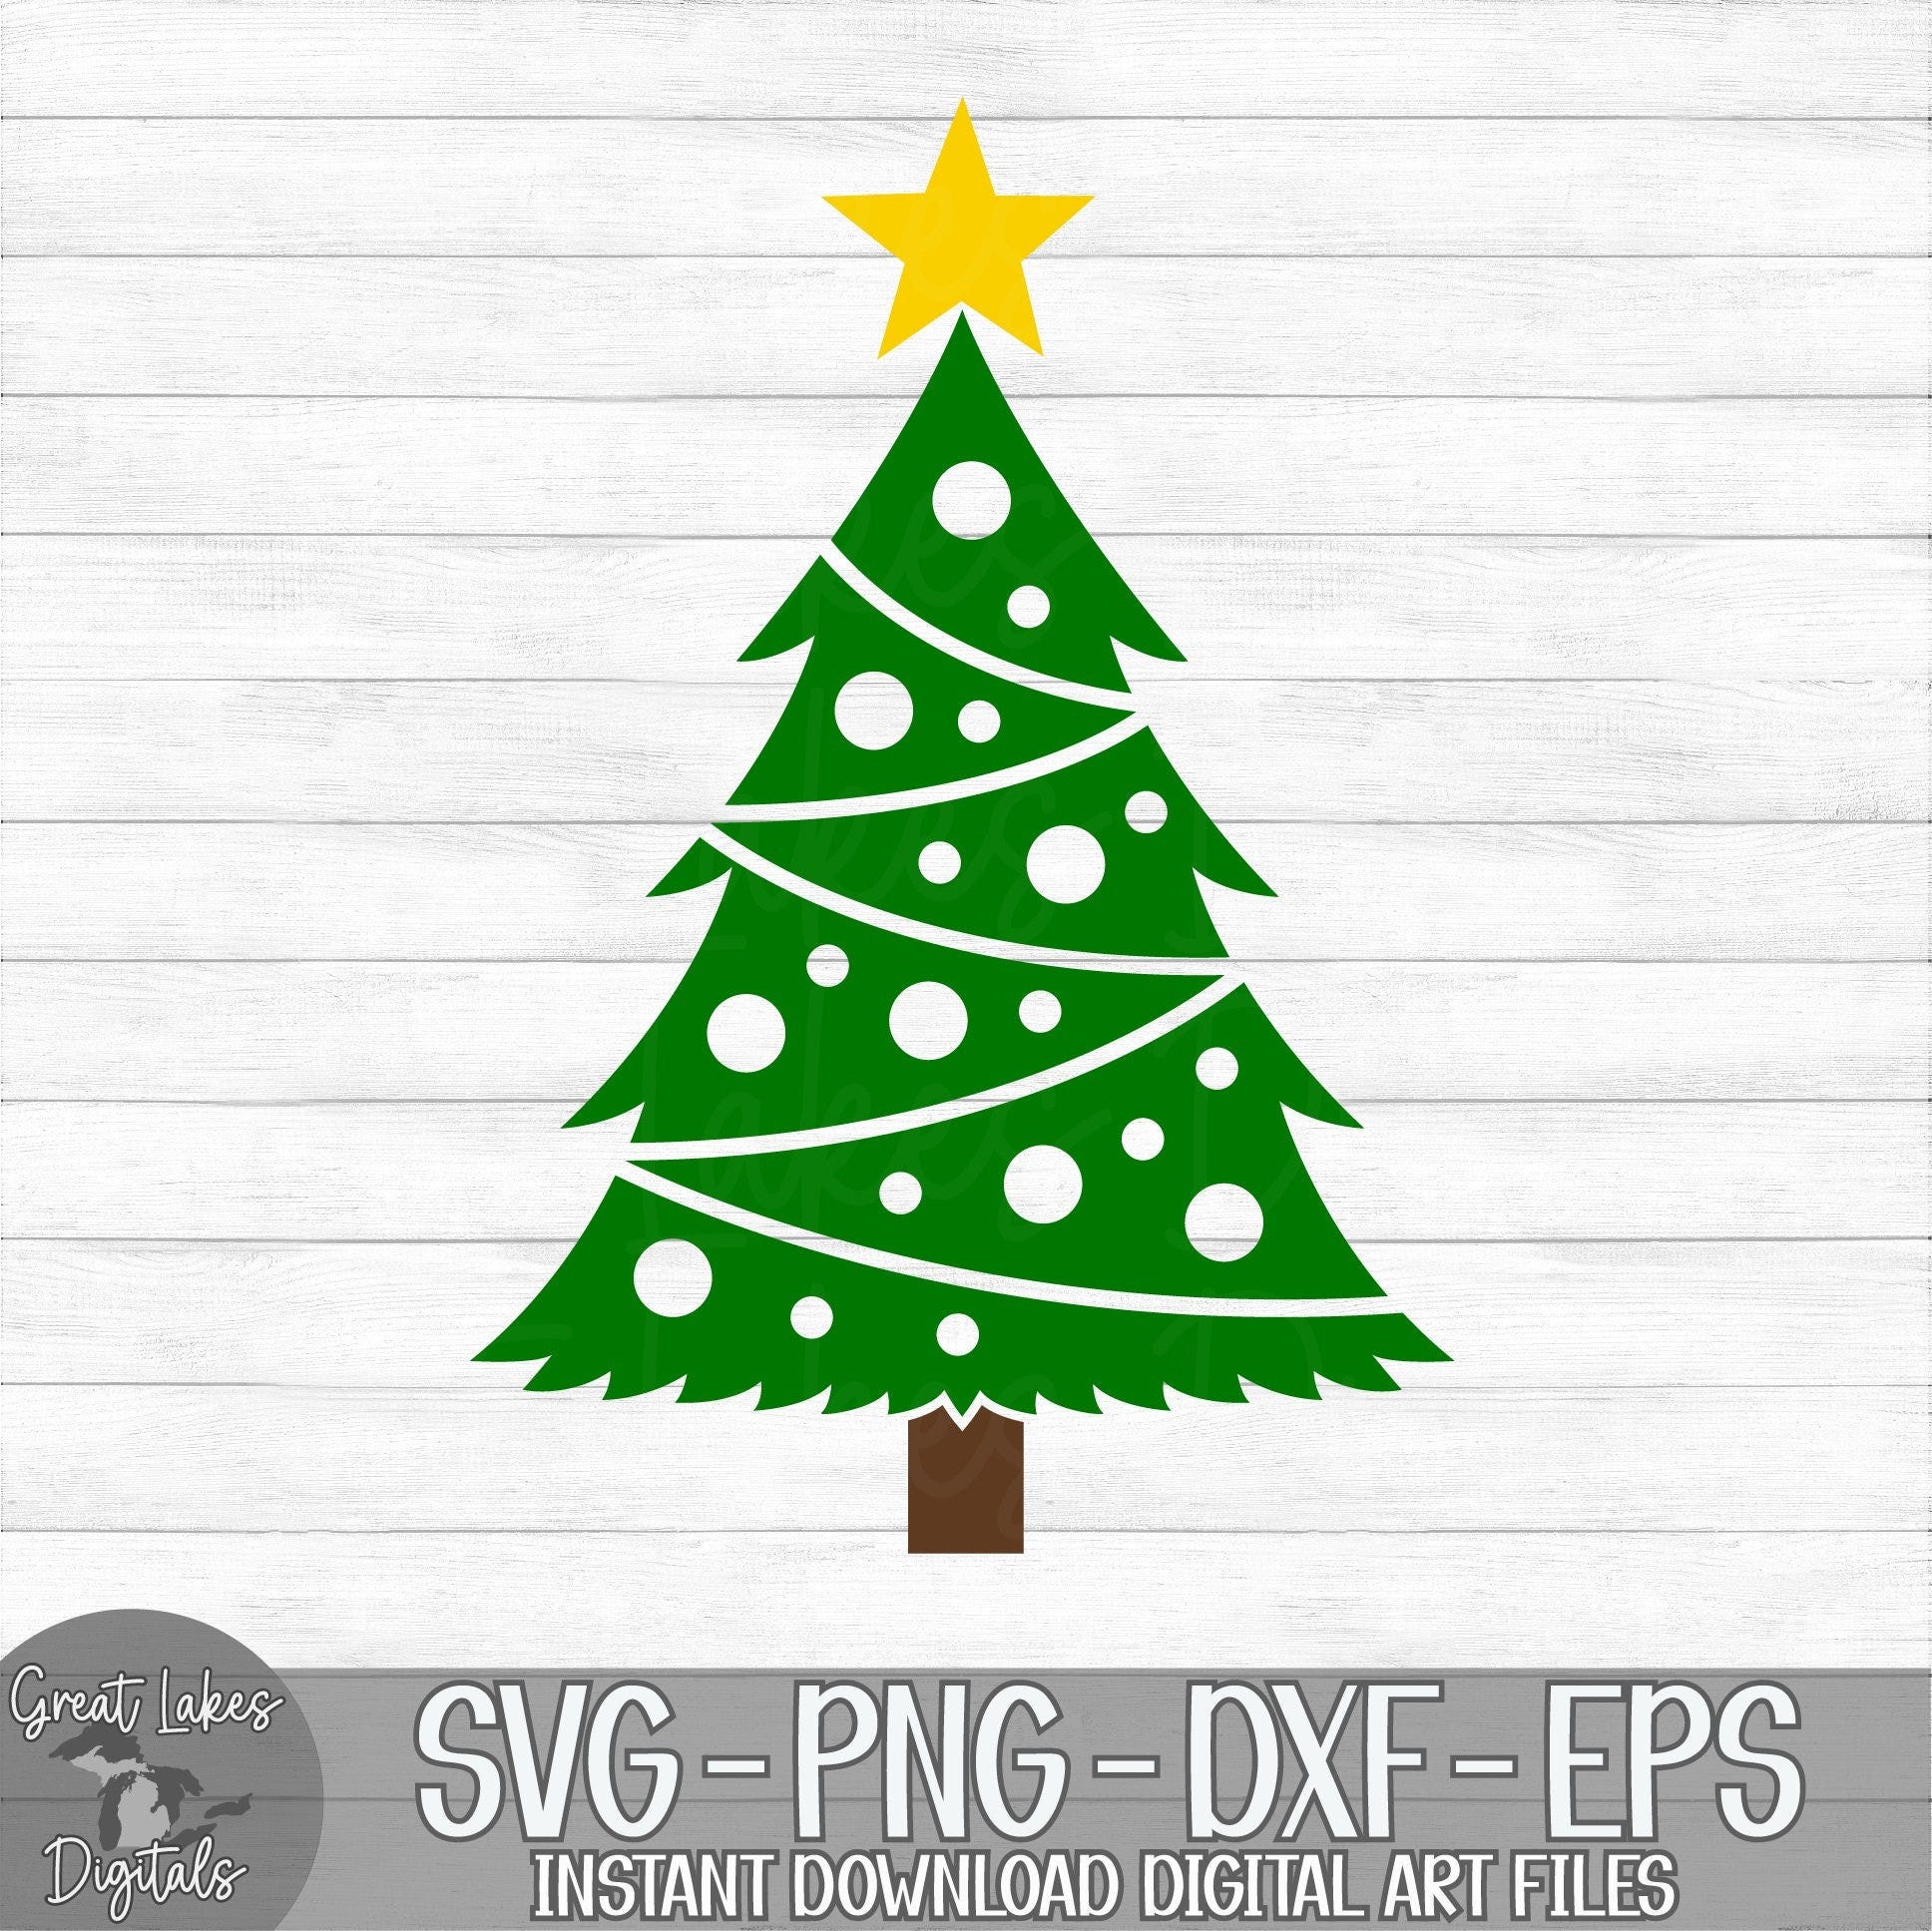 Christmas Tree - Instant Digital Download - svg, png, dxf, and eps files included! Winter, Christmas, Pine Tree, Ornaments